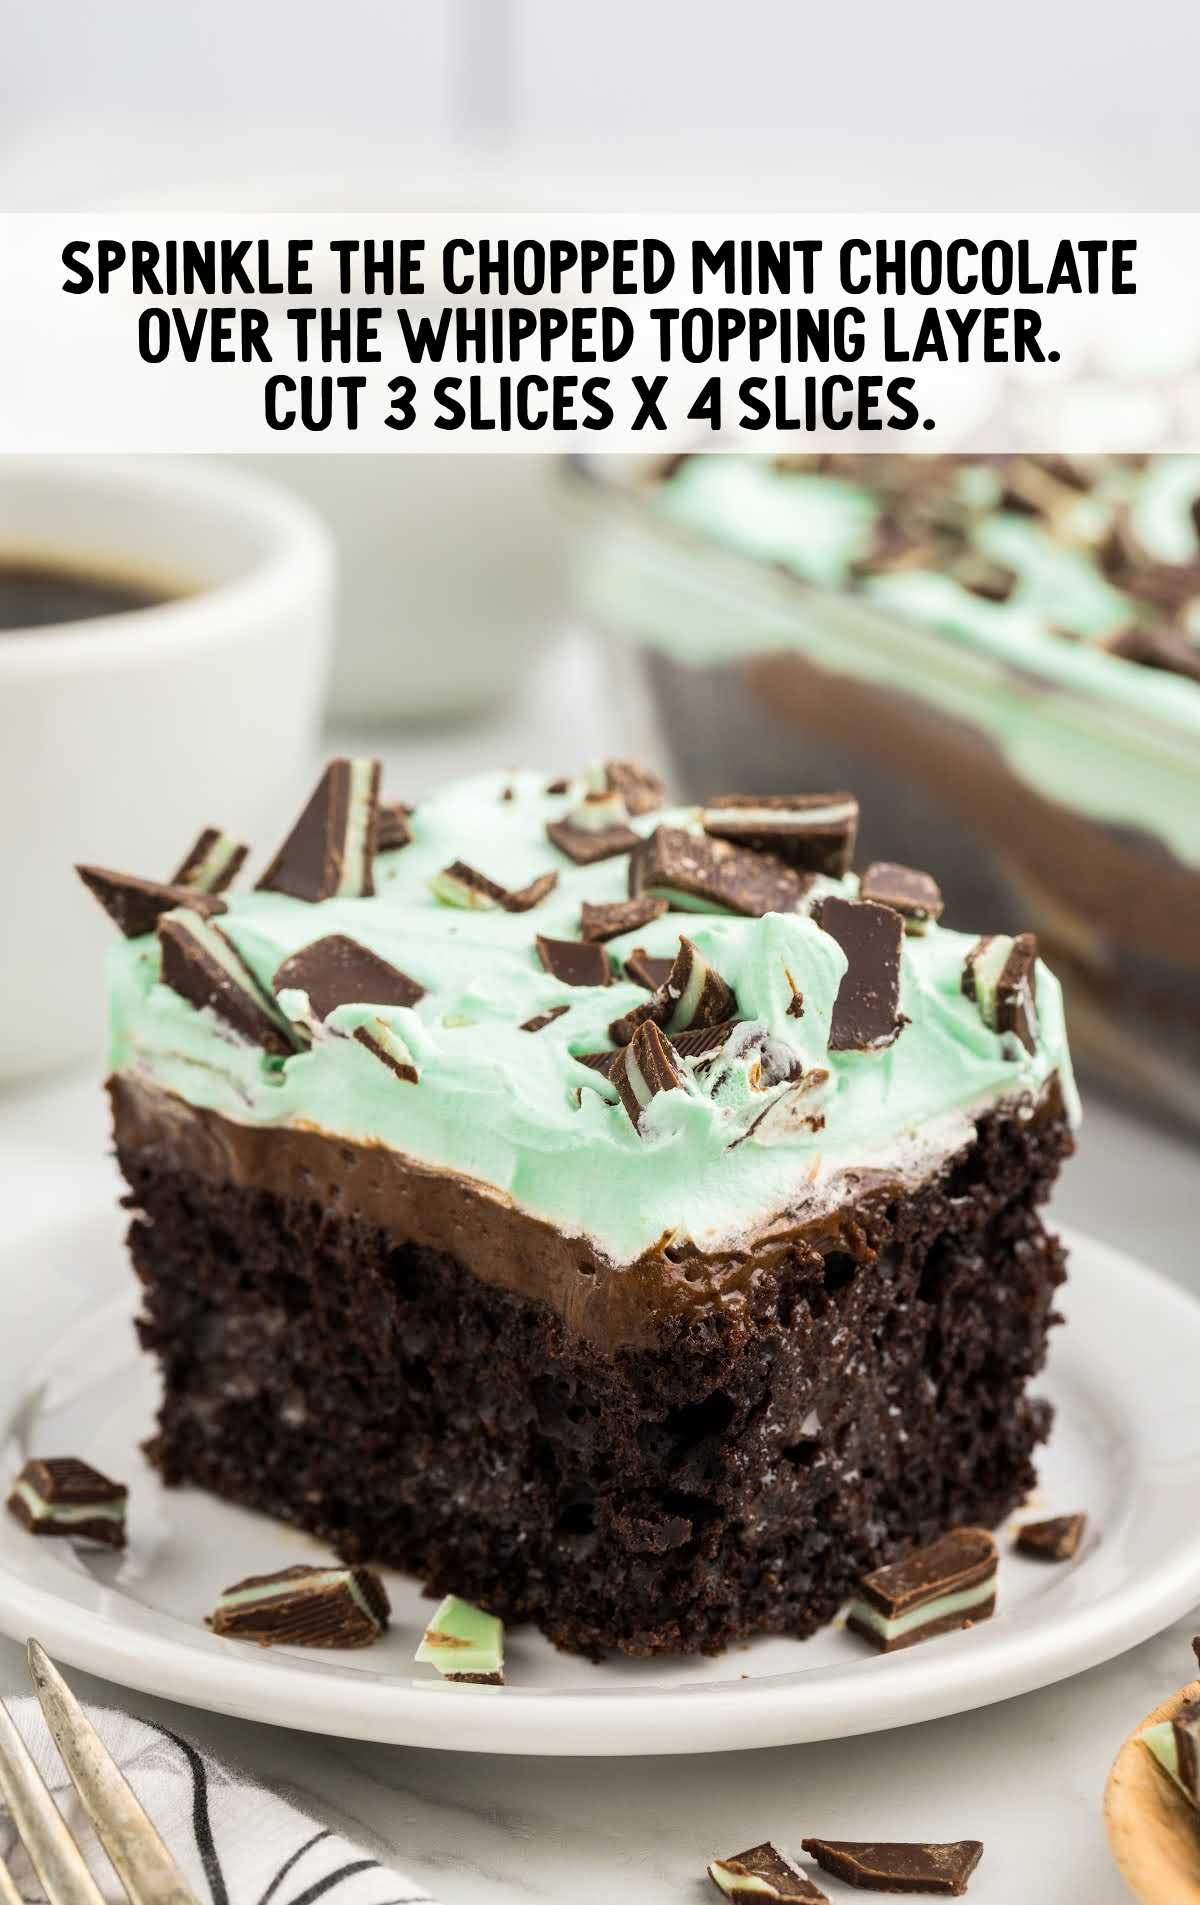 chopped mint chocolate sprinkled over the whipped topping layer